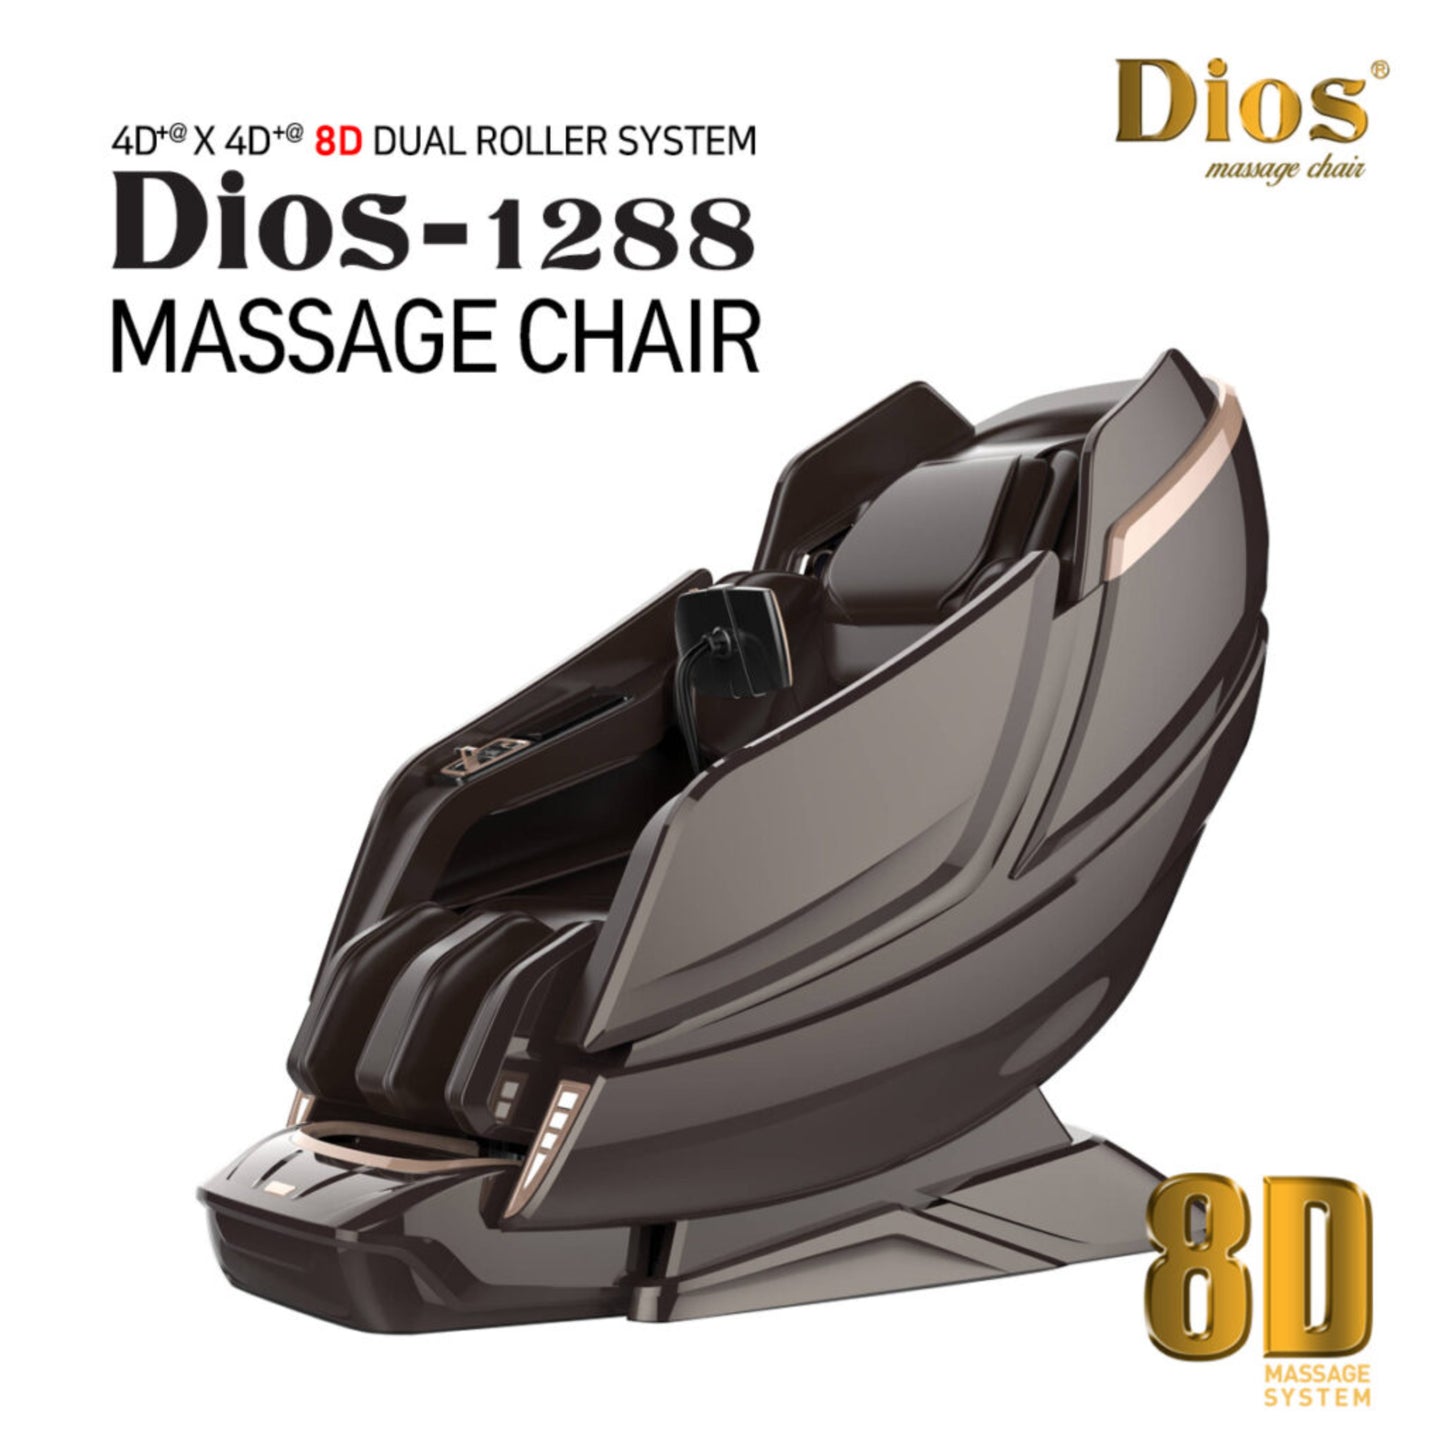 Kahuna Dios Massage Chair 8D AI Dual Air Tech Touch Roller SL-track with Brain Relaxation Program Dios-1288 - Brown